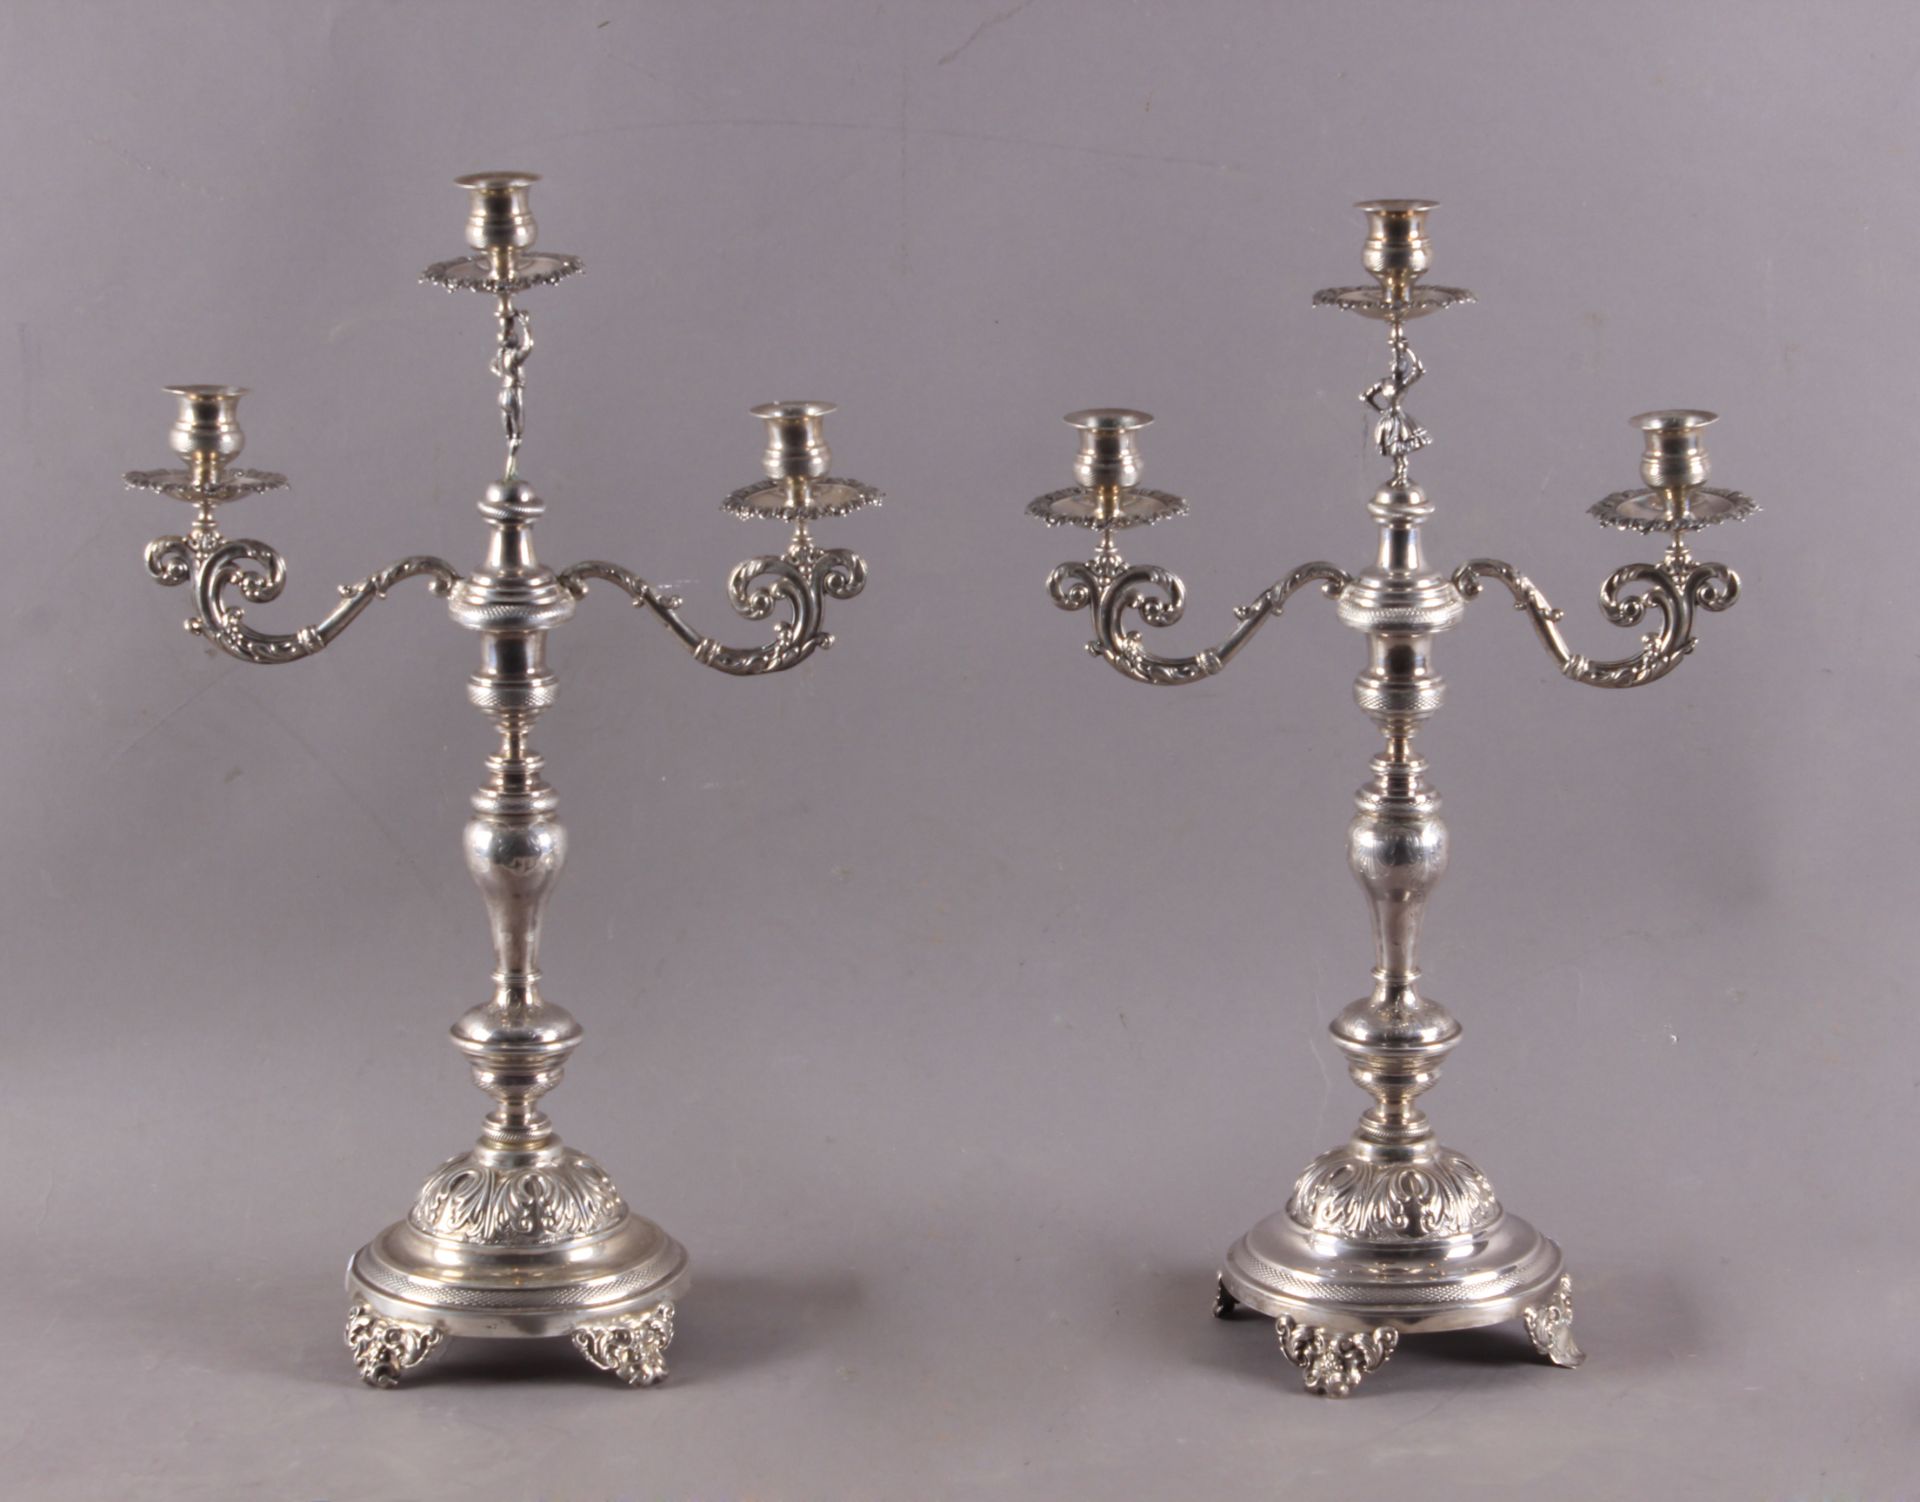 A pair of 19th century silver candelabras